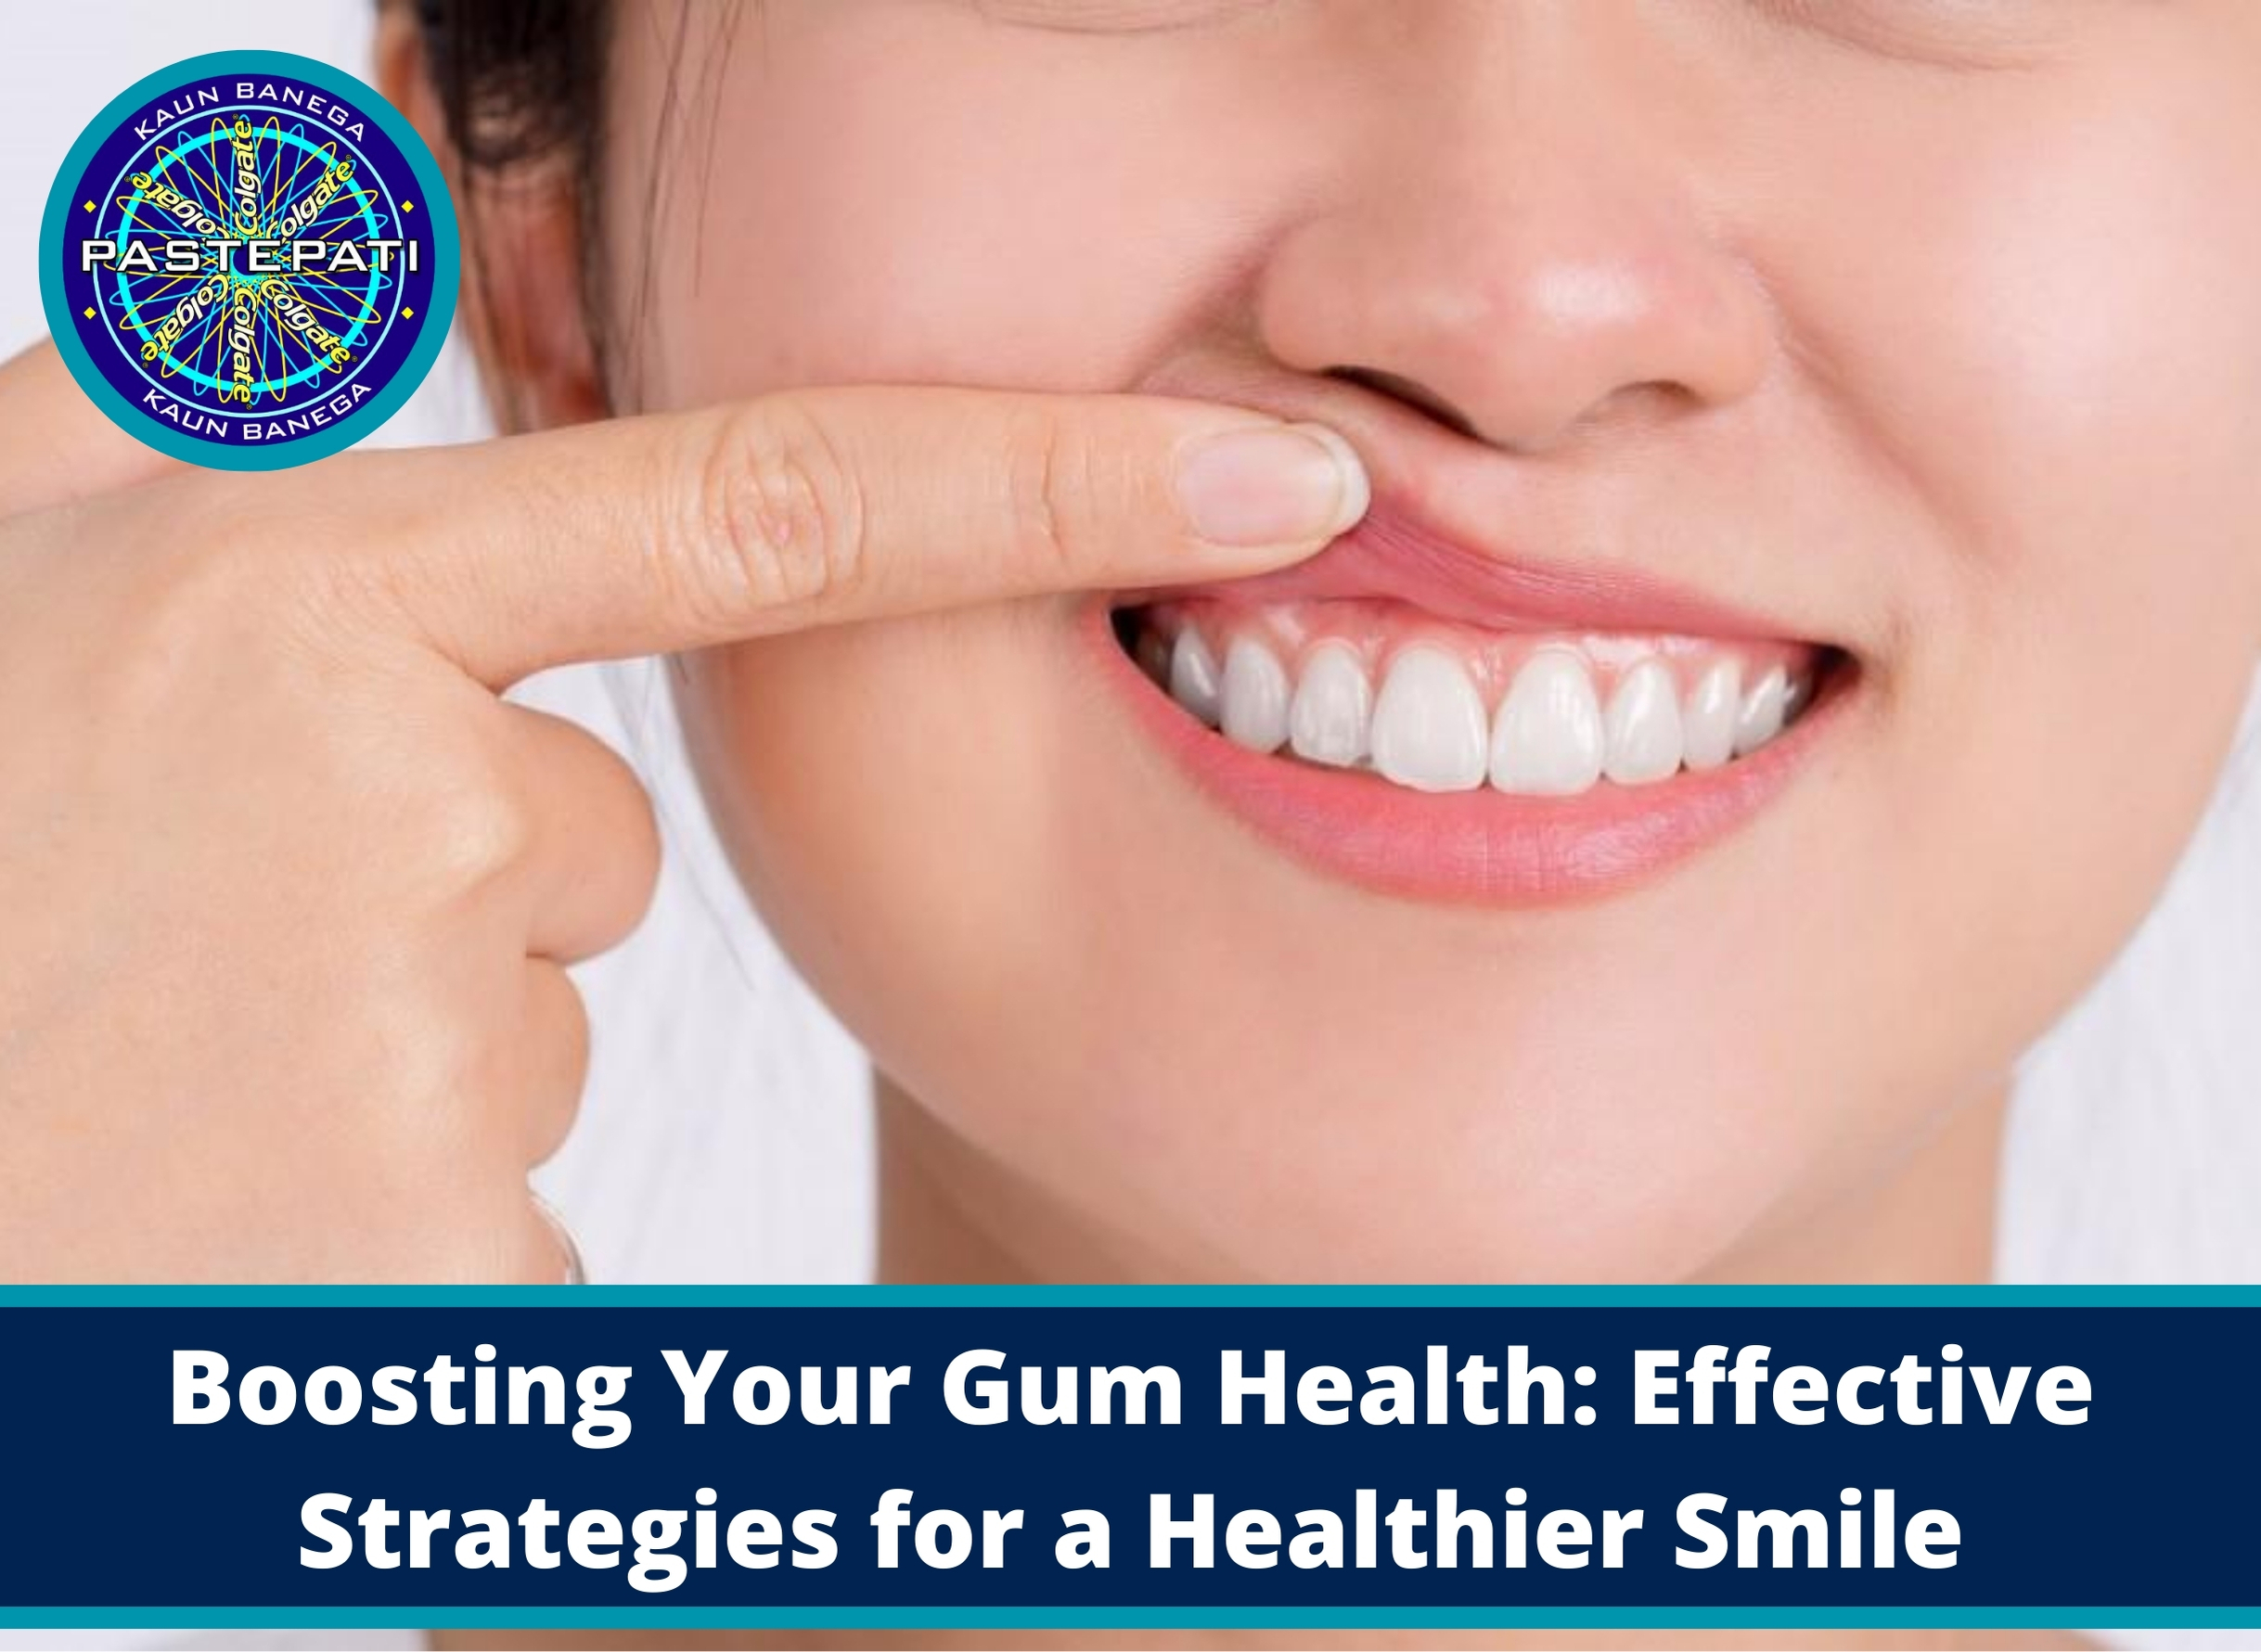 Boosting Your Gum Health: Effective Strategies for a Healthier Smile